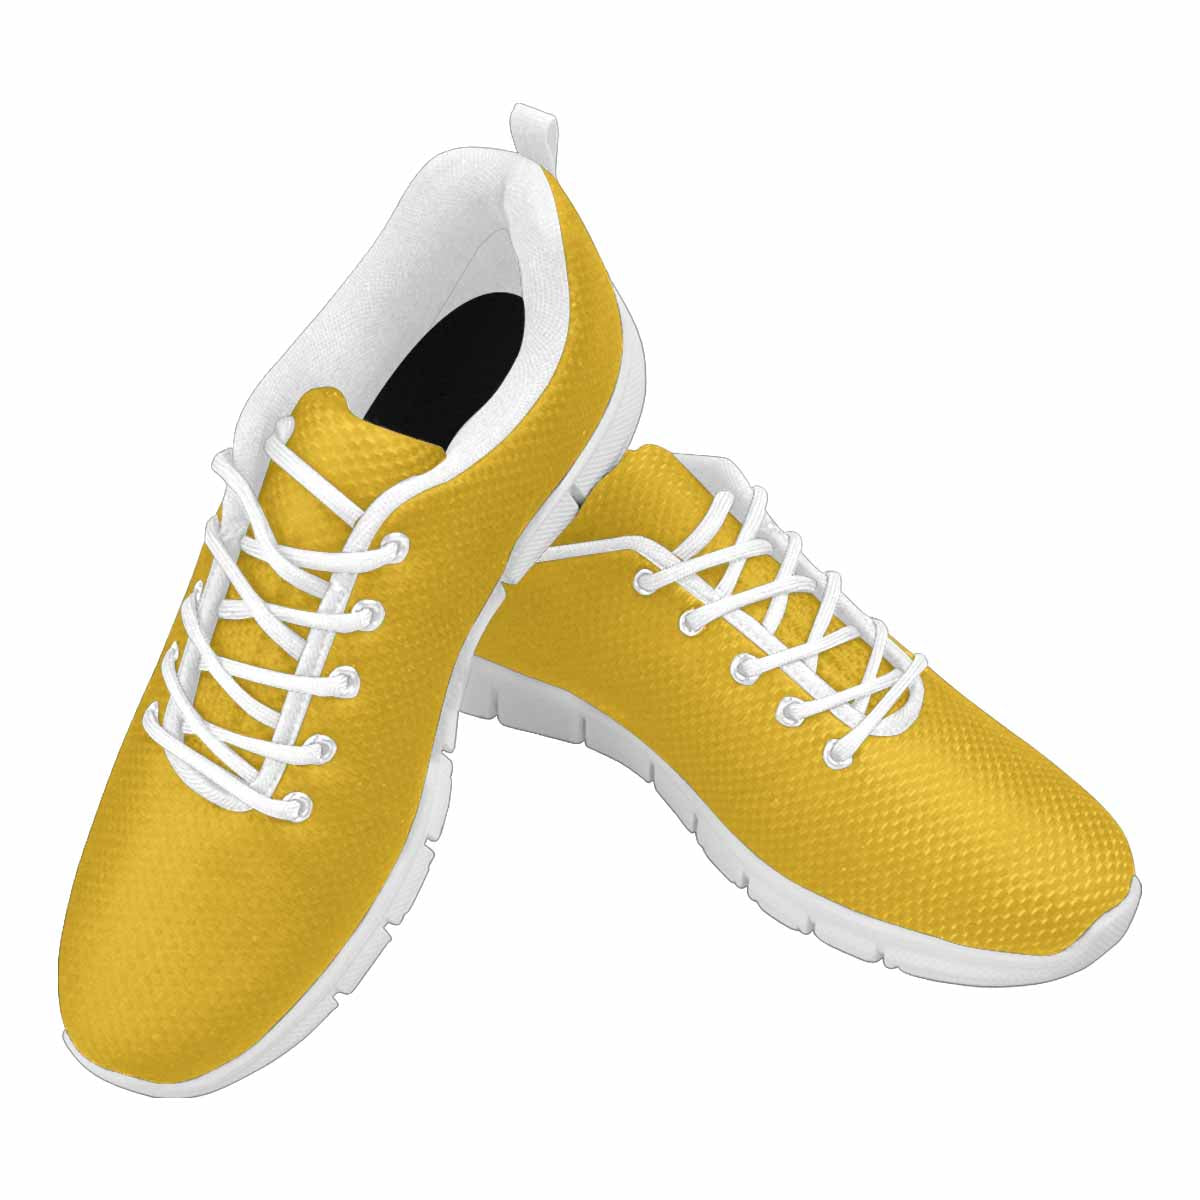 Sneakers For Men,    Freesia Yellow   - Running Shoes